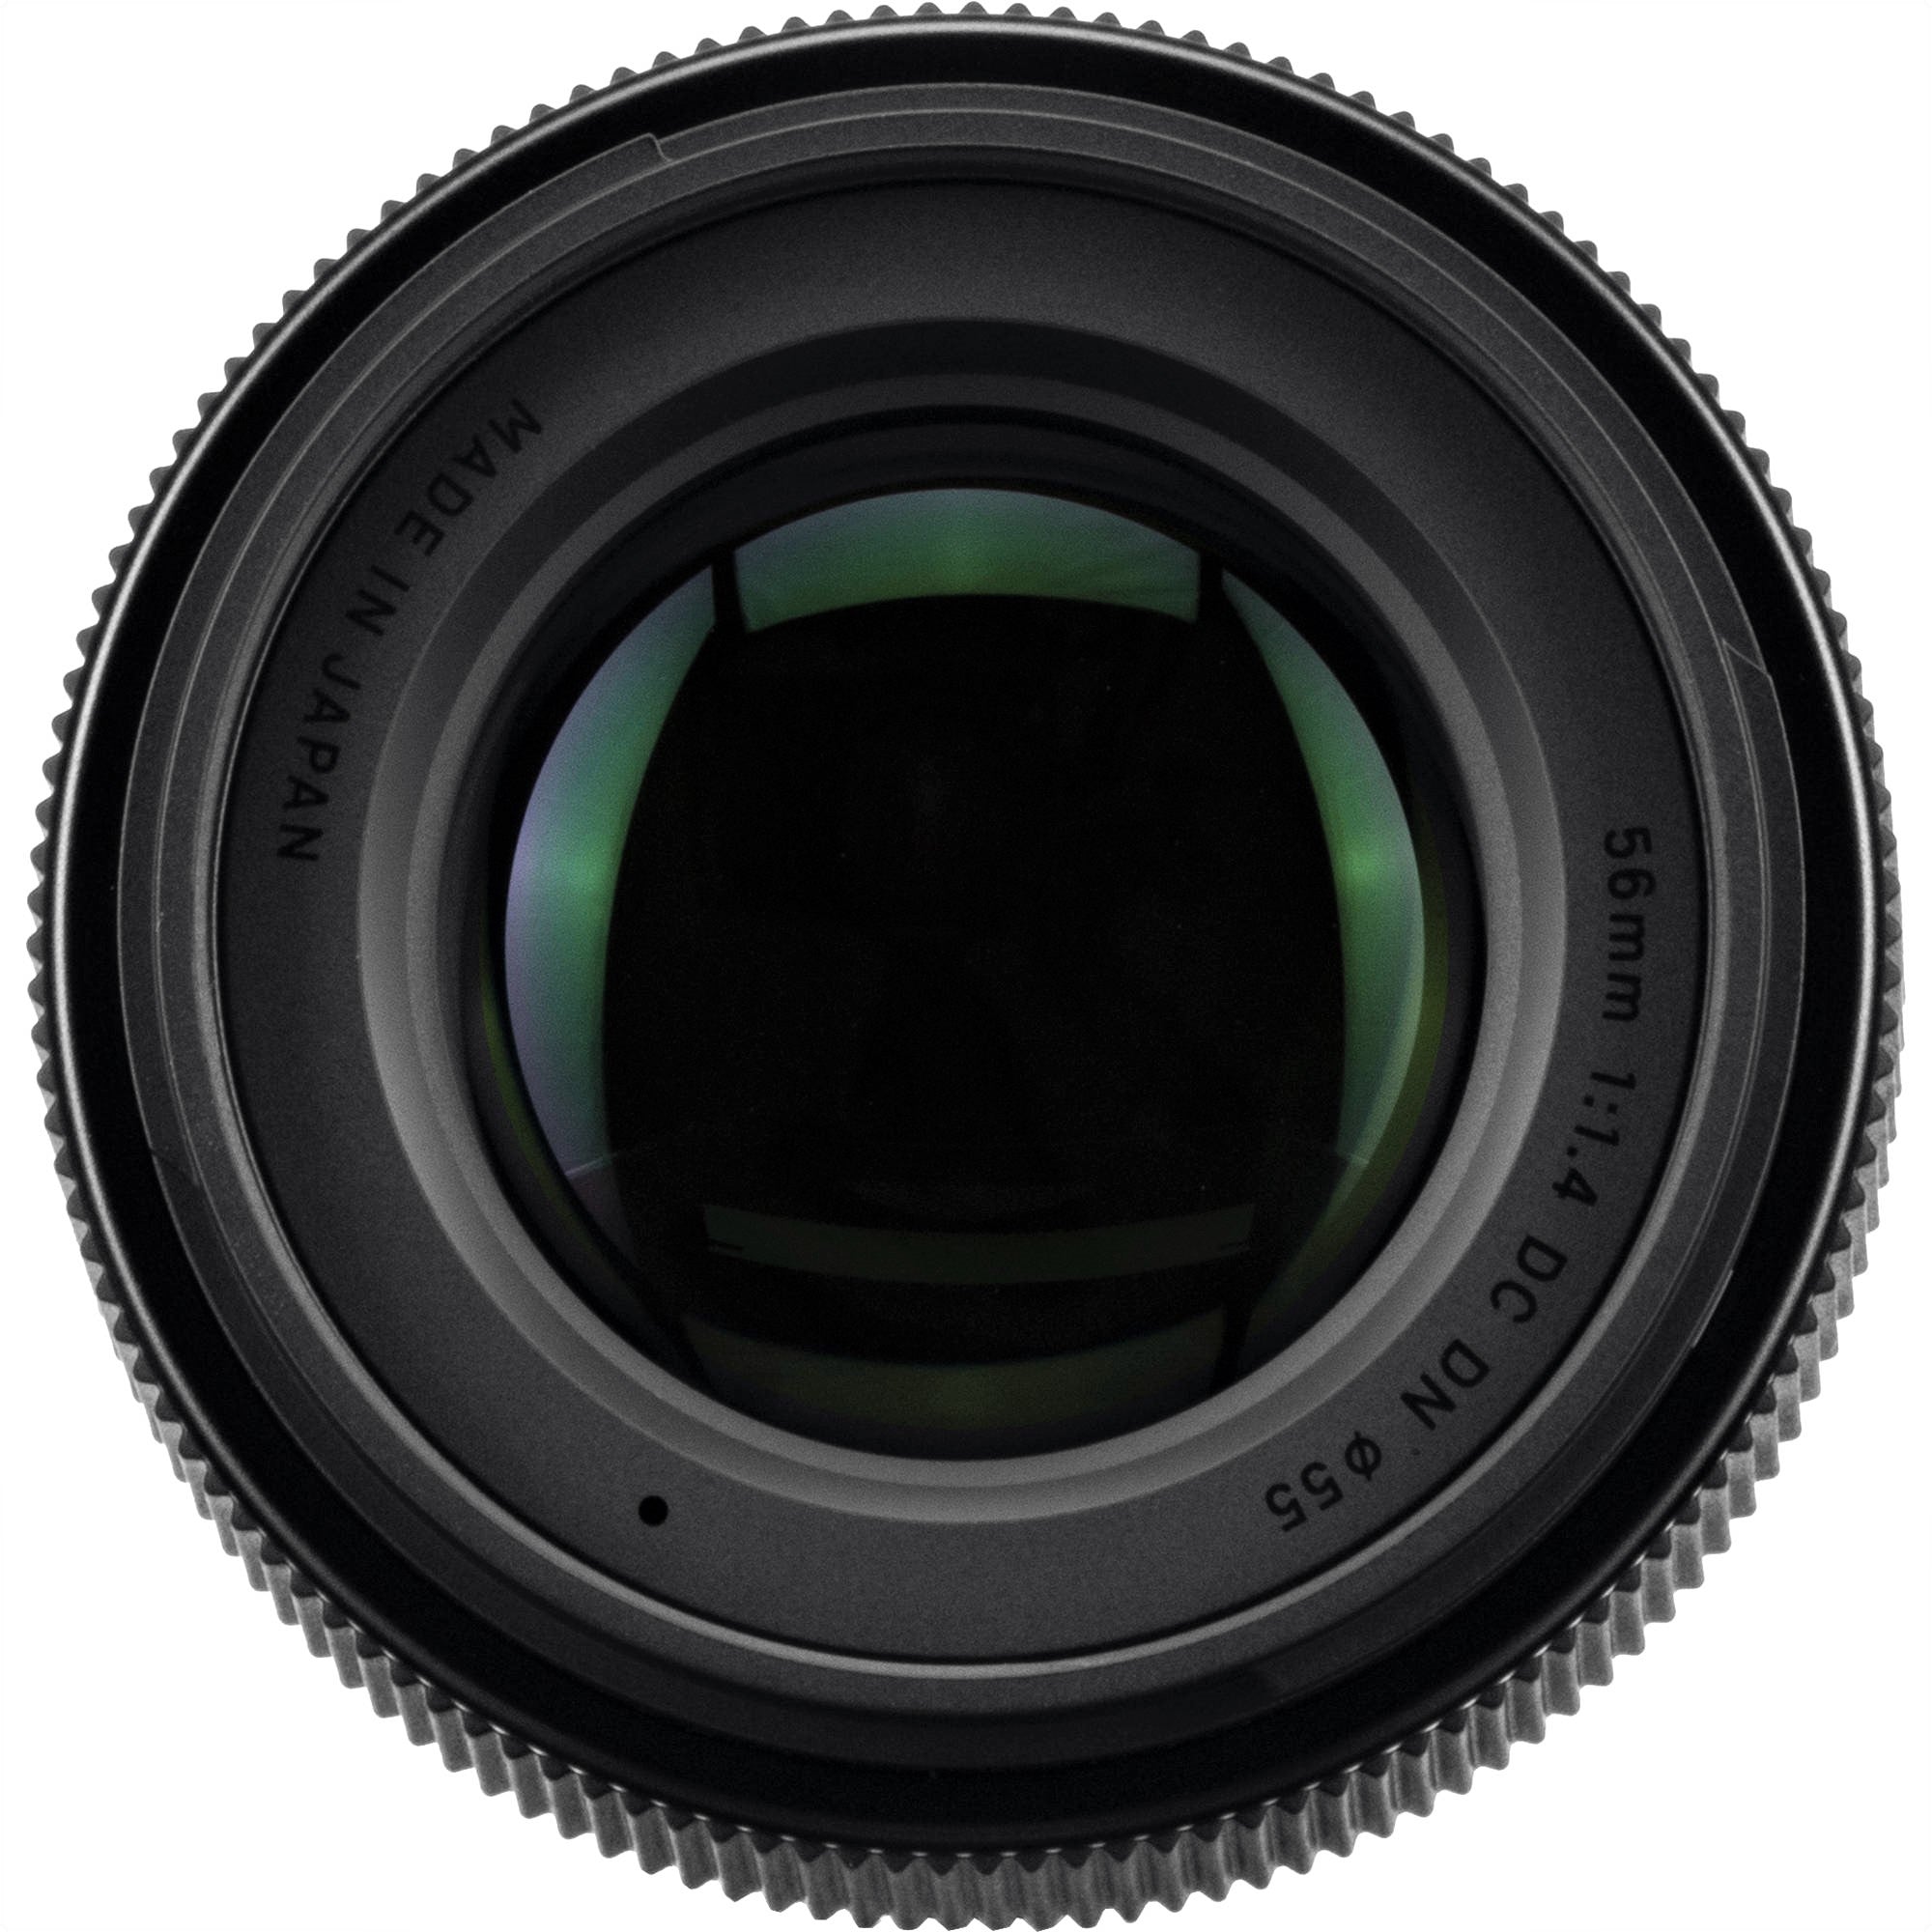 Sigma 56mm f/1.4 DC DN | C review - Front View